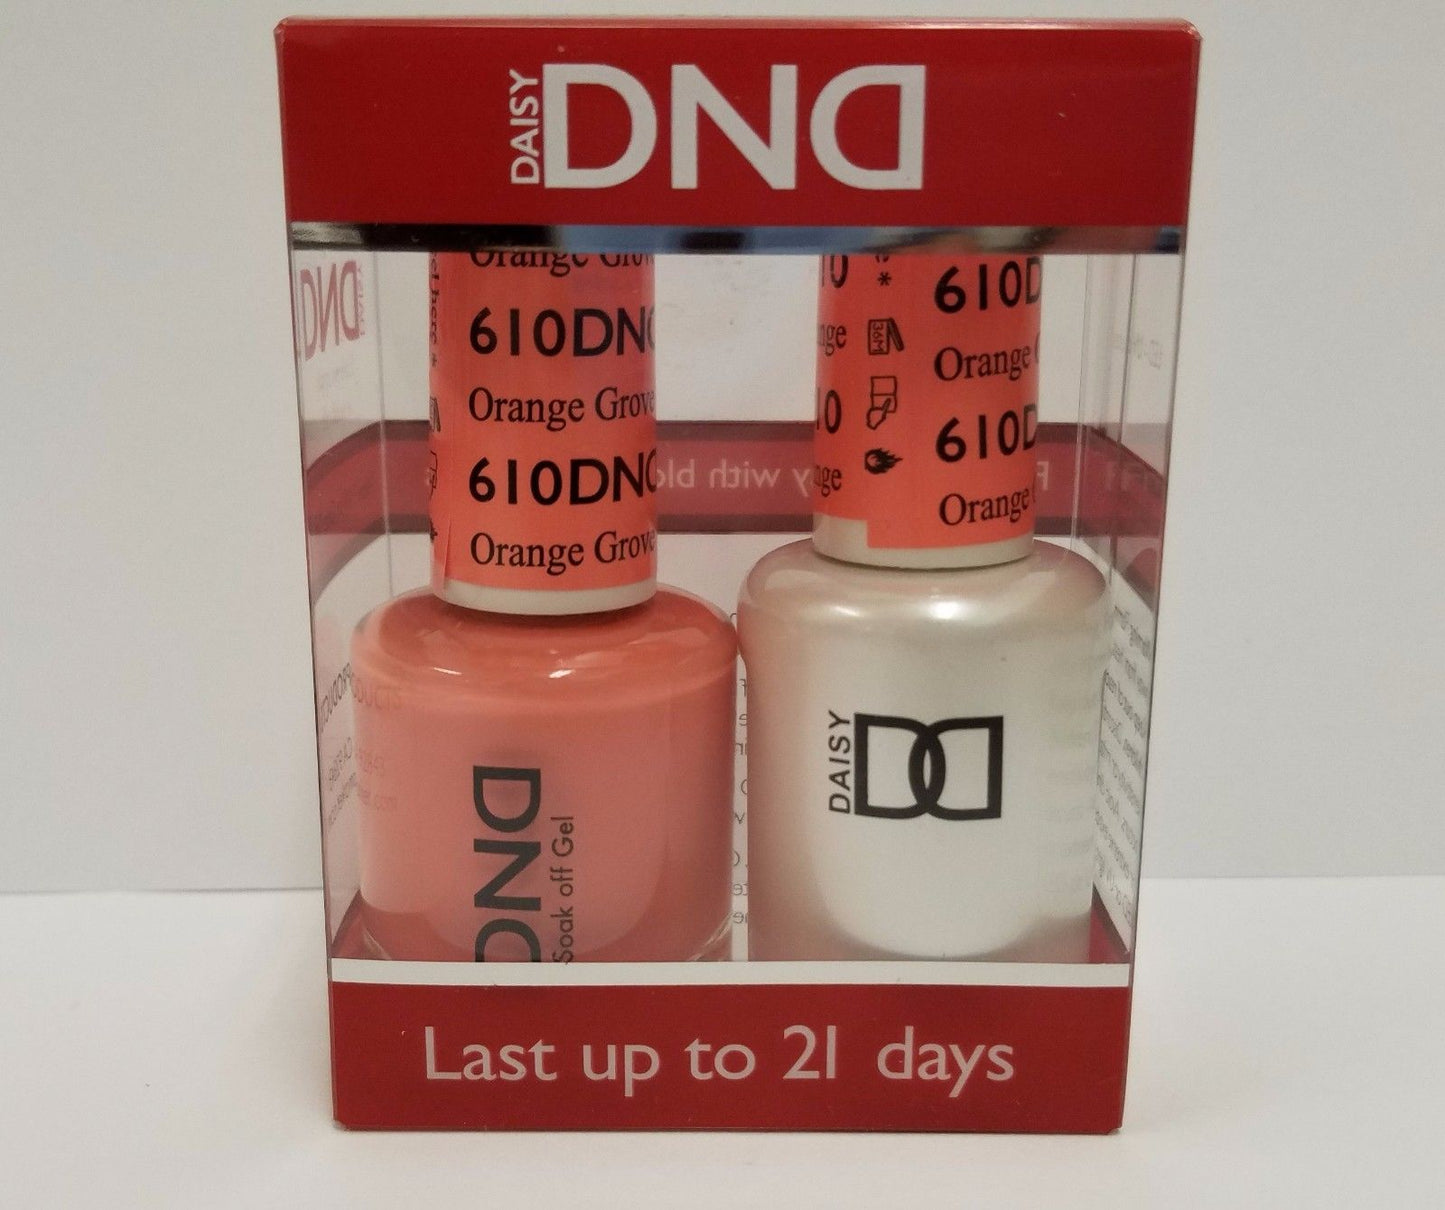 DND Duo GEL + MATCHING Nail Polish SET (587 to 621) - Choose Your Colors